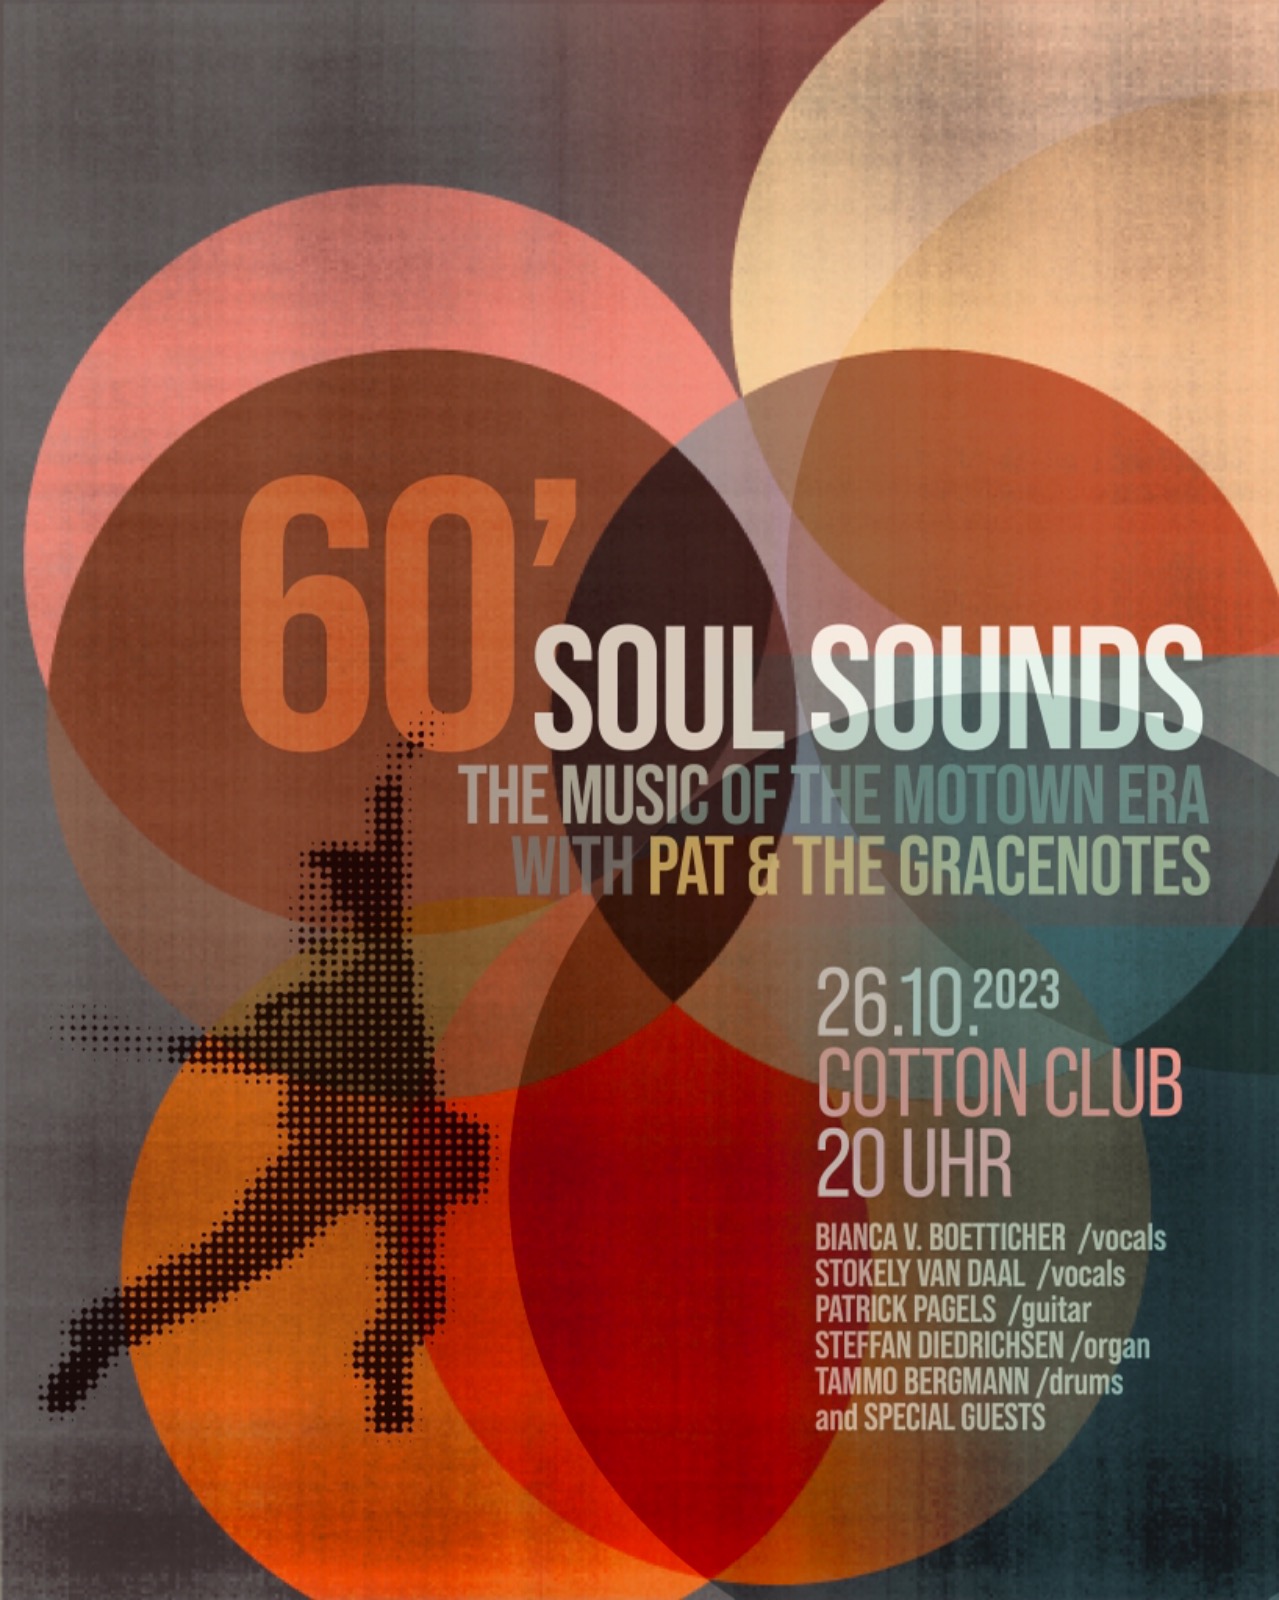 THE 60s SOUL SOUNDS - THE MUSIC OF THE MOTOWN ERA